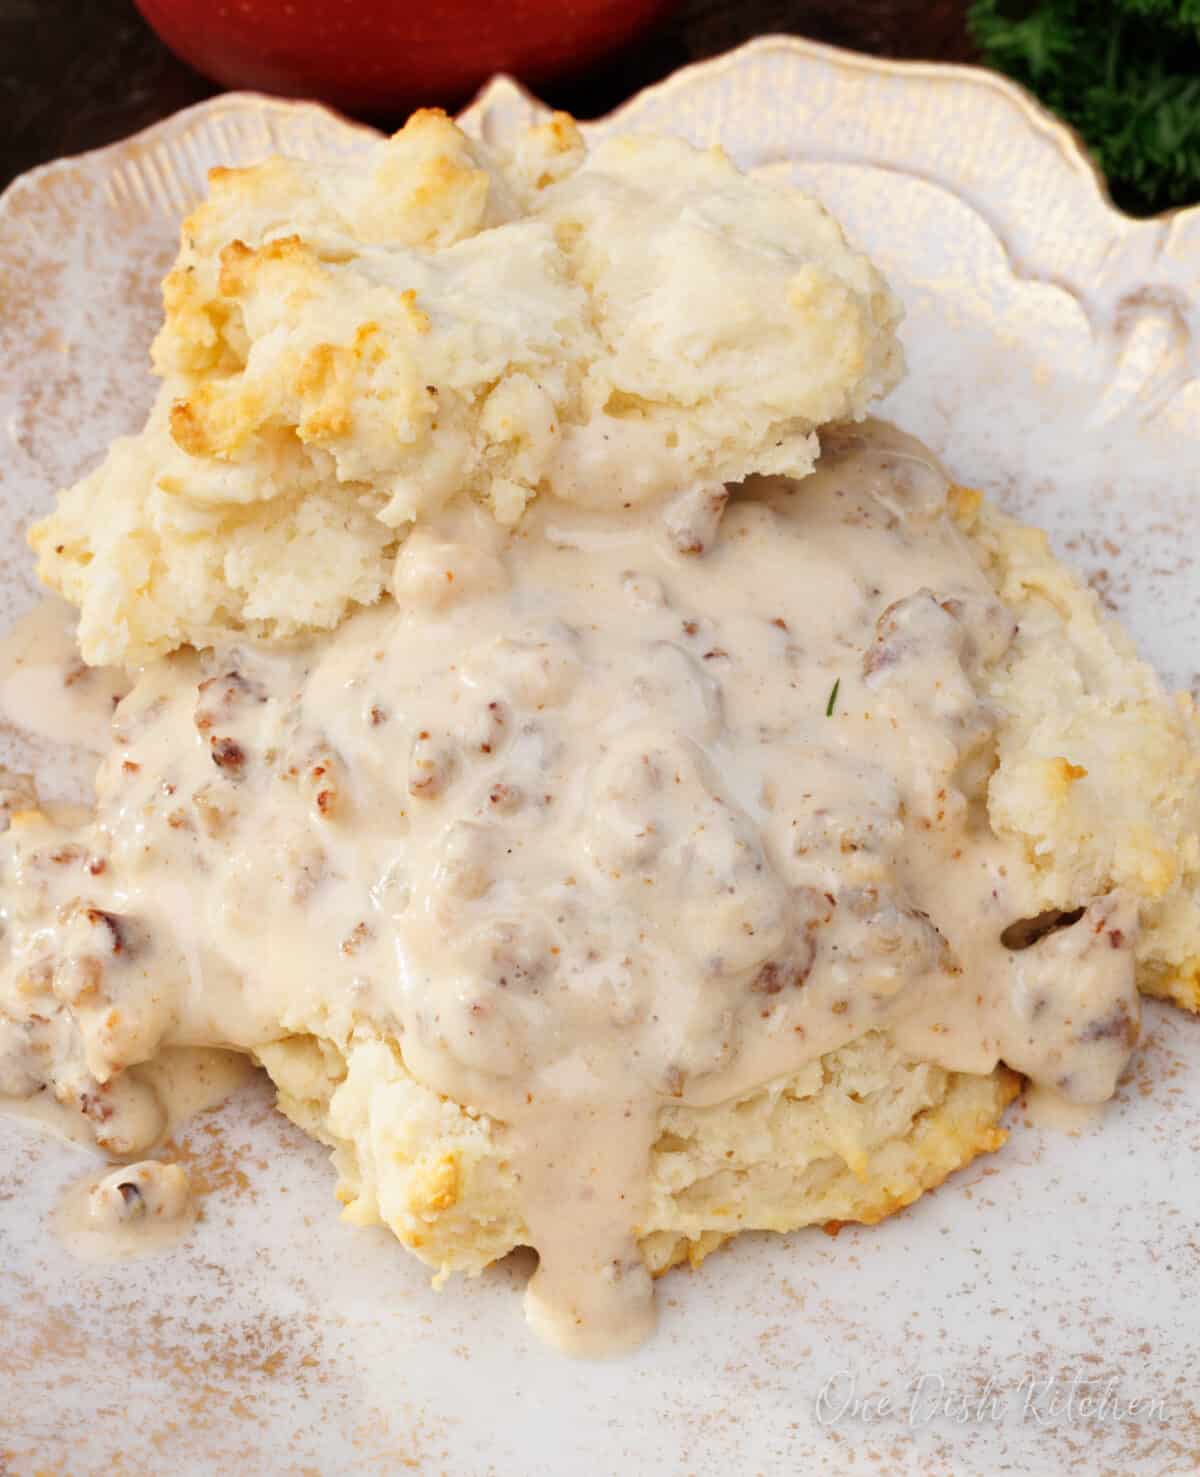 biscuits and gravy on a plate.